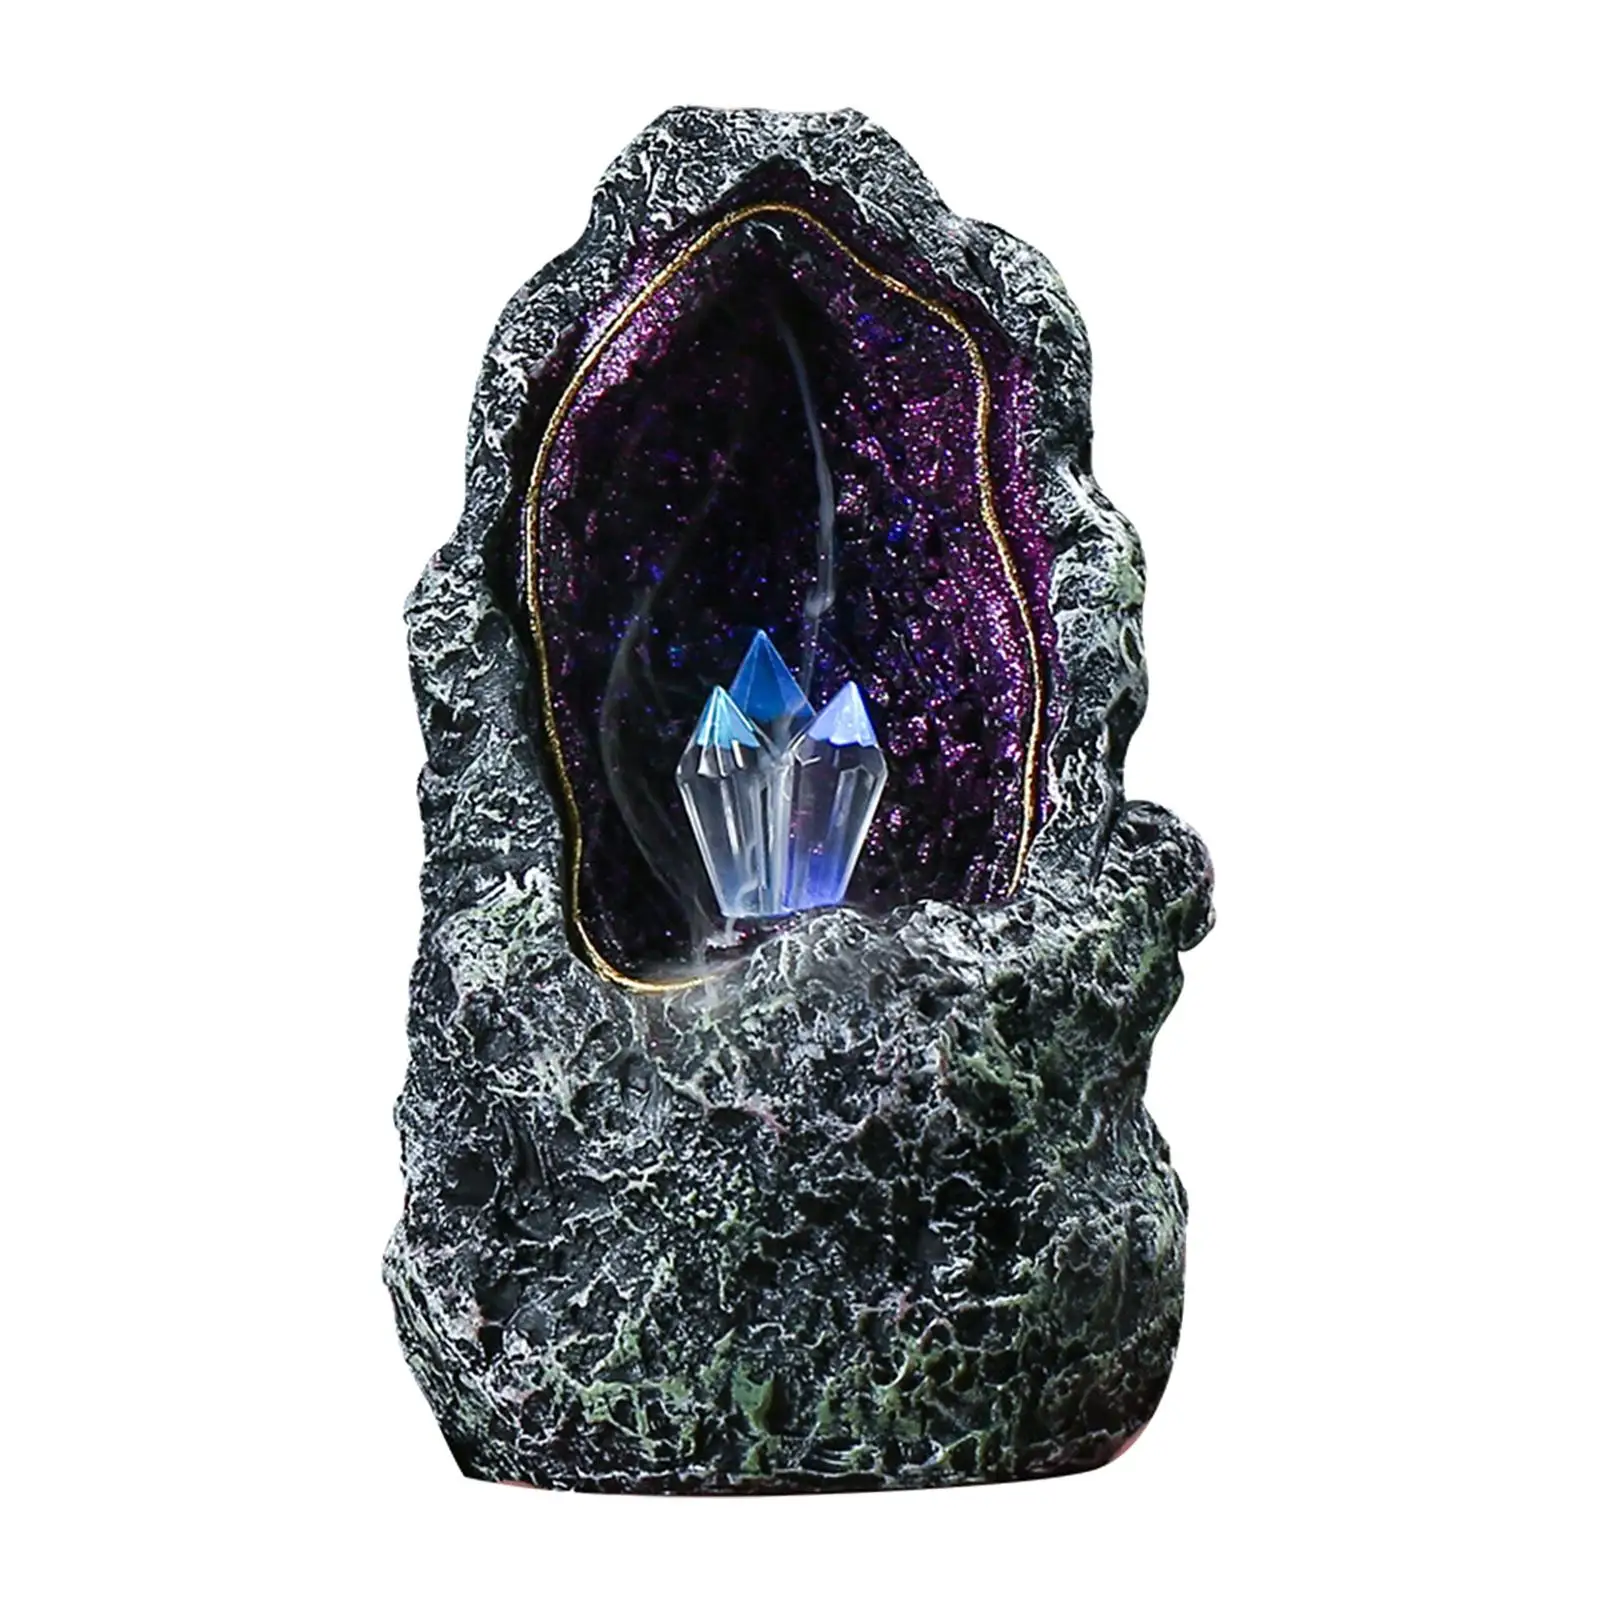 Backflow Incense Burner Waterfall Incense Cones Holder LED Lights Aromatherapy  Fountain for Meditation Home Decoration Table images - 6